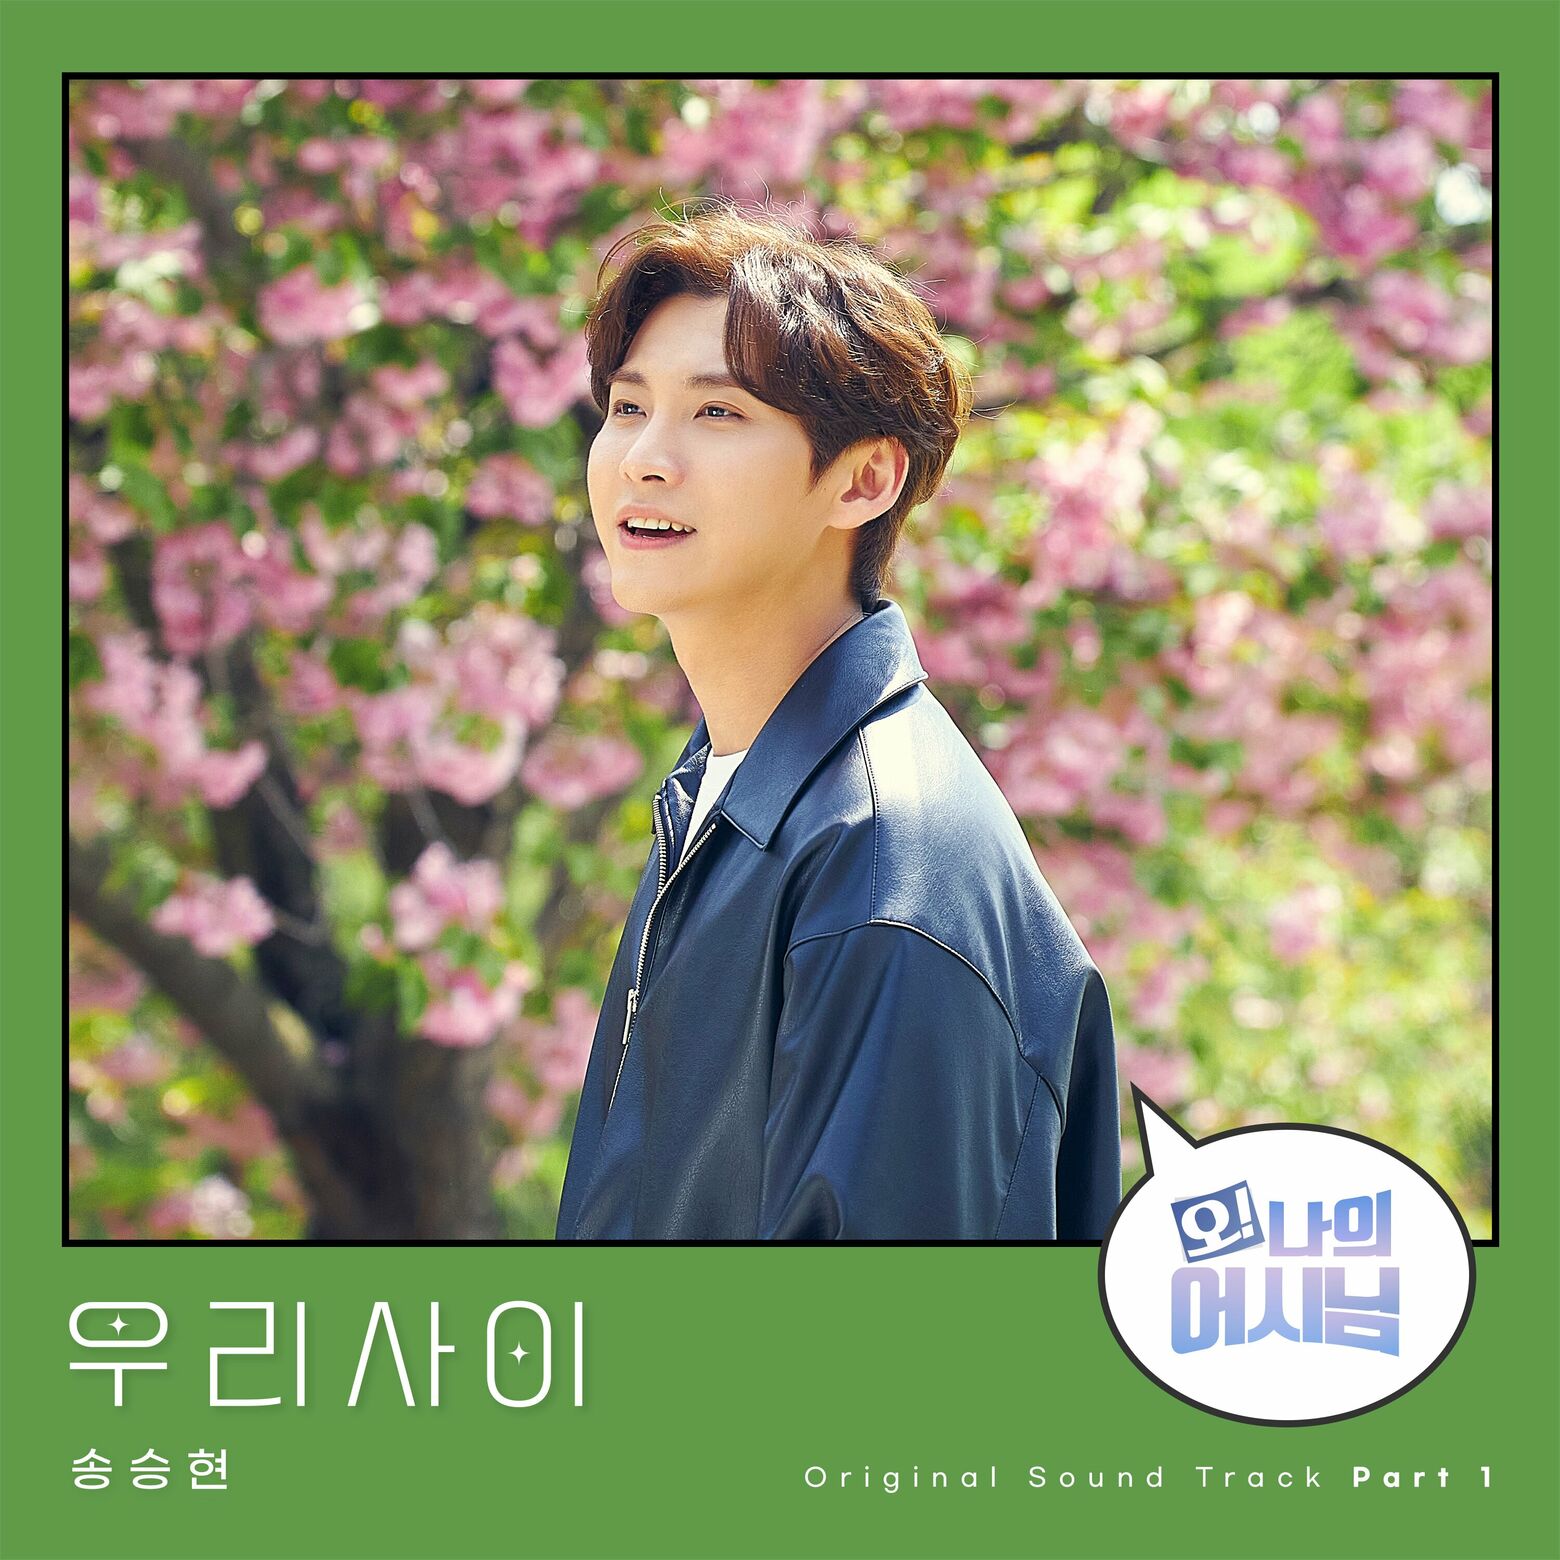 Song Seung Hyun – Oh! My assistant (Original Television Soundtrack) Pt. 1